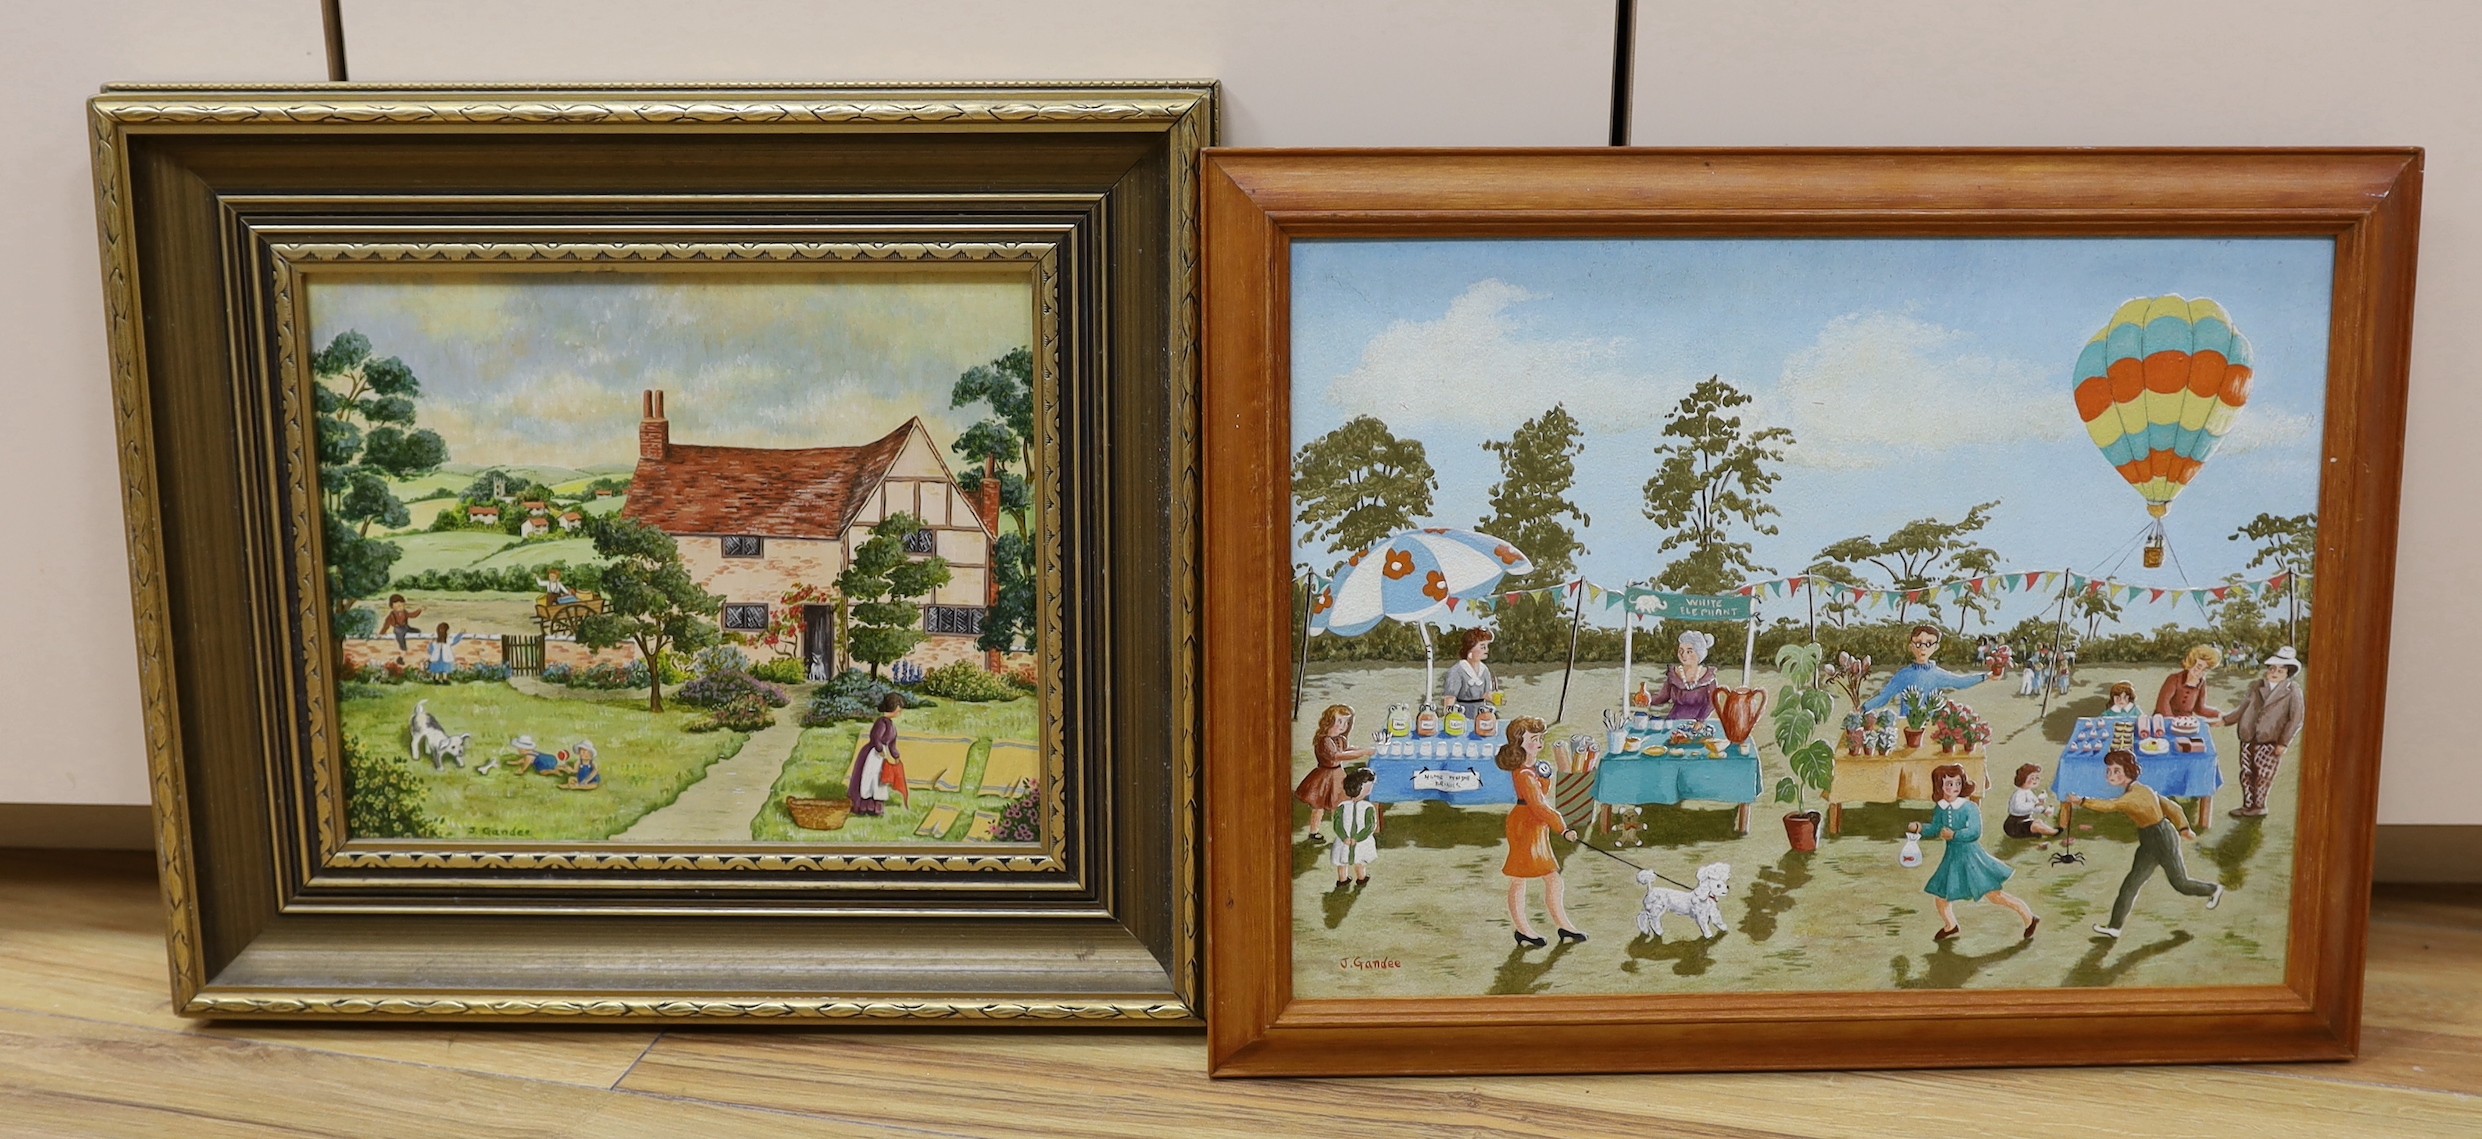 Joyce Gandee, two oils on board, 'Cottage Garden scene' and 'The Village Fete', 23 x 29cm and 30 x 40cm